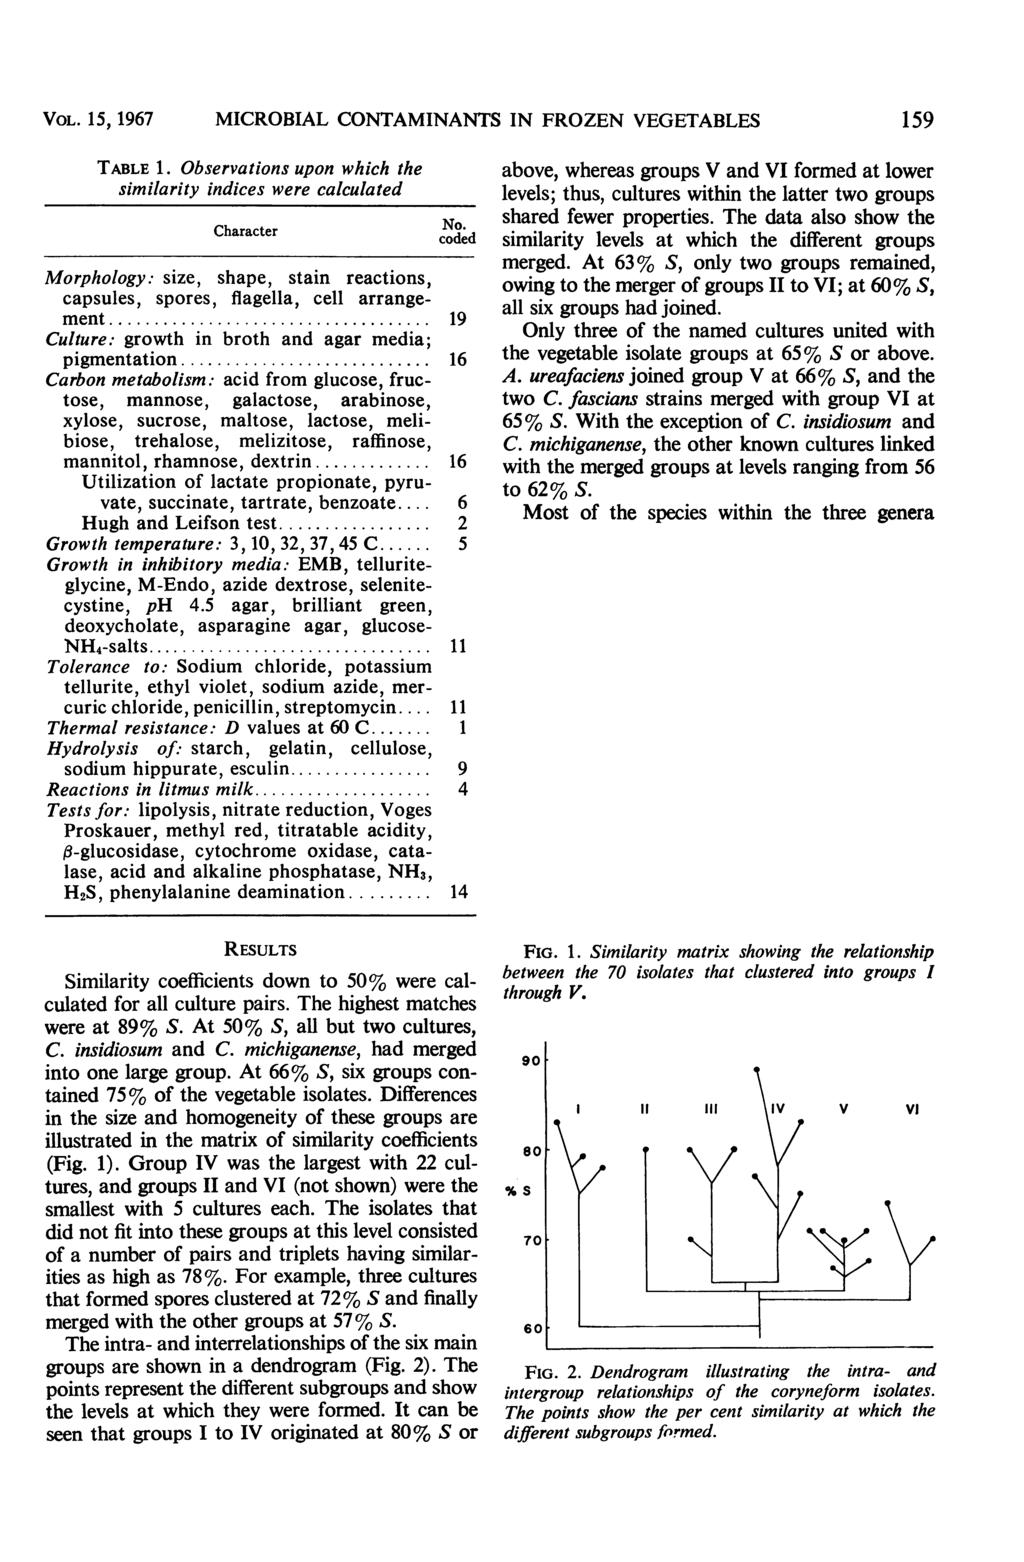 VOL. 15,1967 MCROBAL CONTAMNANTS N FROZEN VEGETABLES 159 TABLE 1. Observations upon which the similarity indices were calculated Character No.